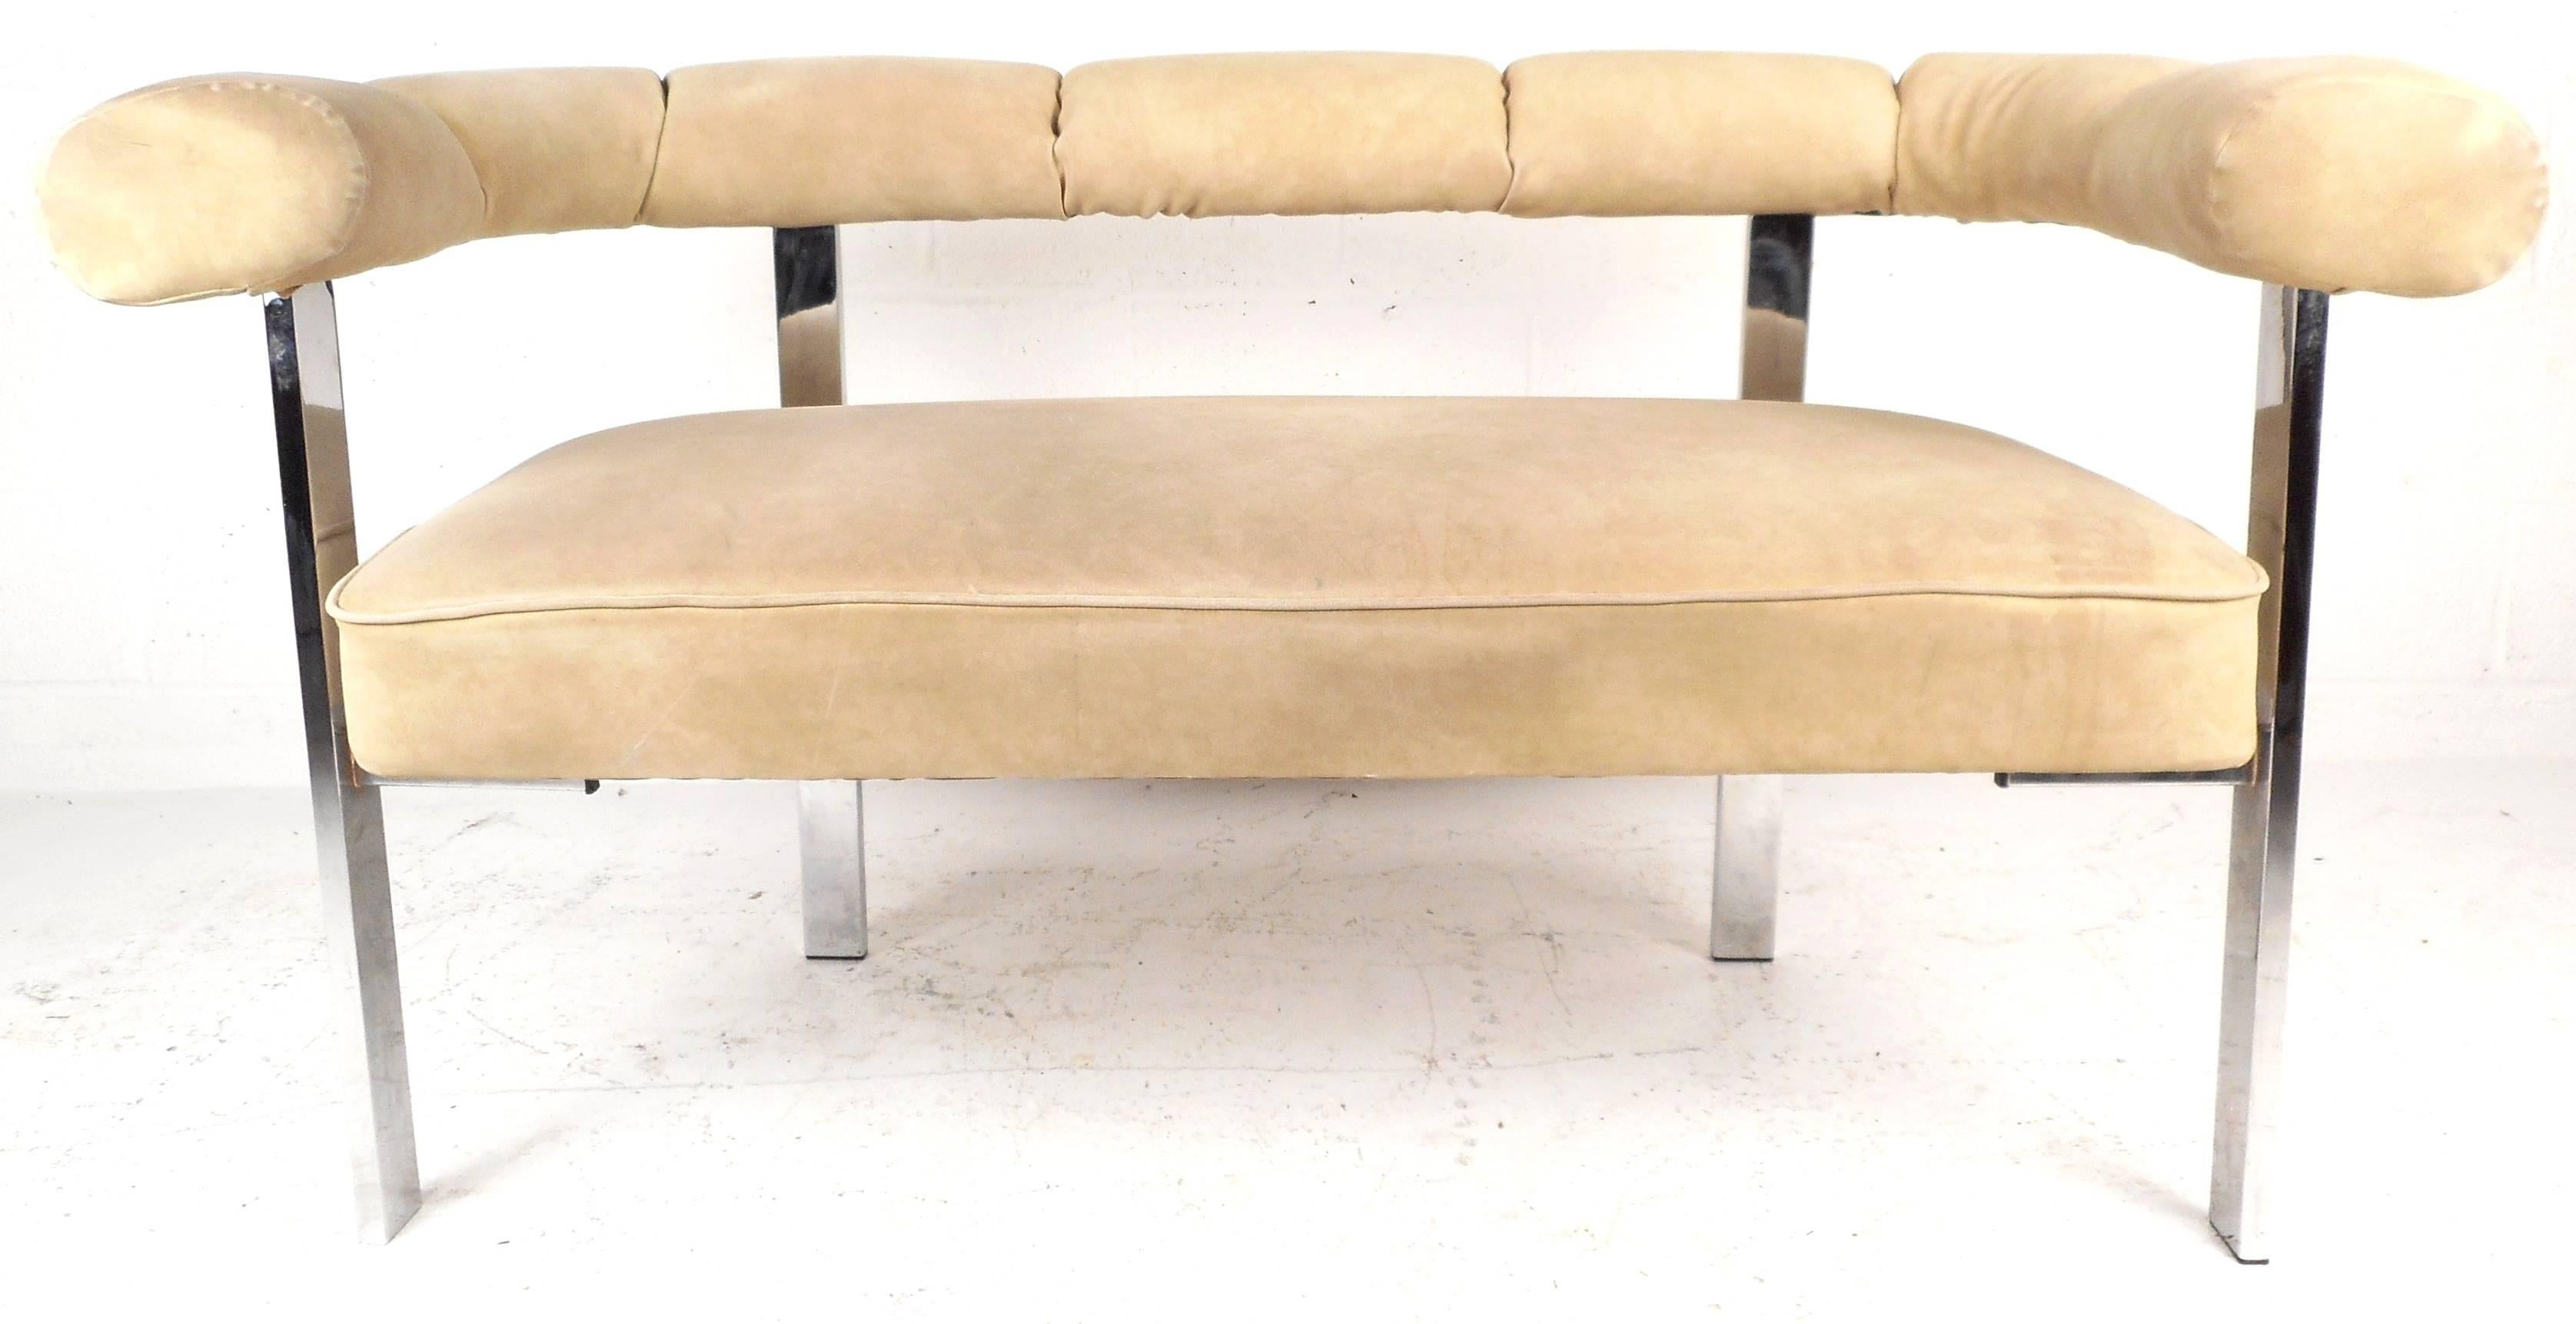 This lovely Mid-Century Modern settee features a plush barrel back that wraps all the way around and a thick chrome frame. The unique design offers comfort and style in any setting. Please confirm item location (NY or NJ).